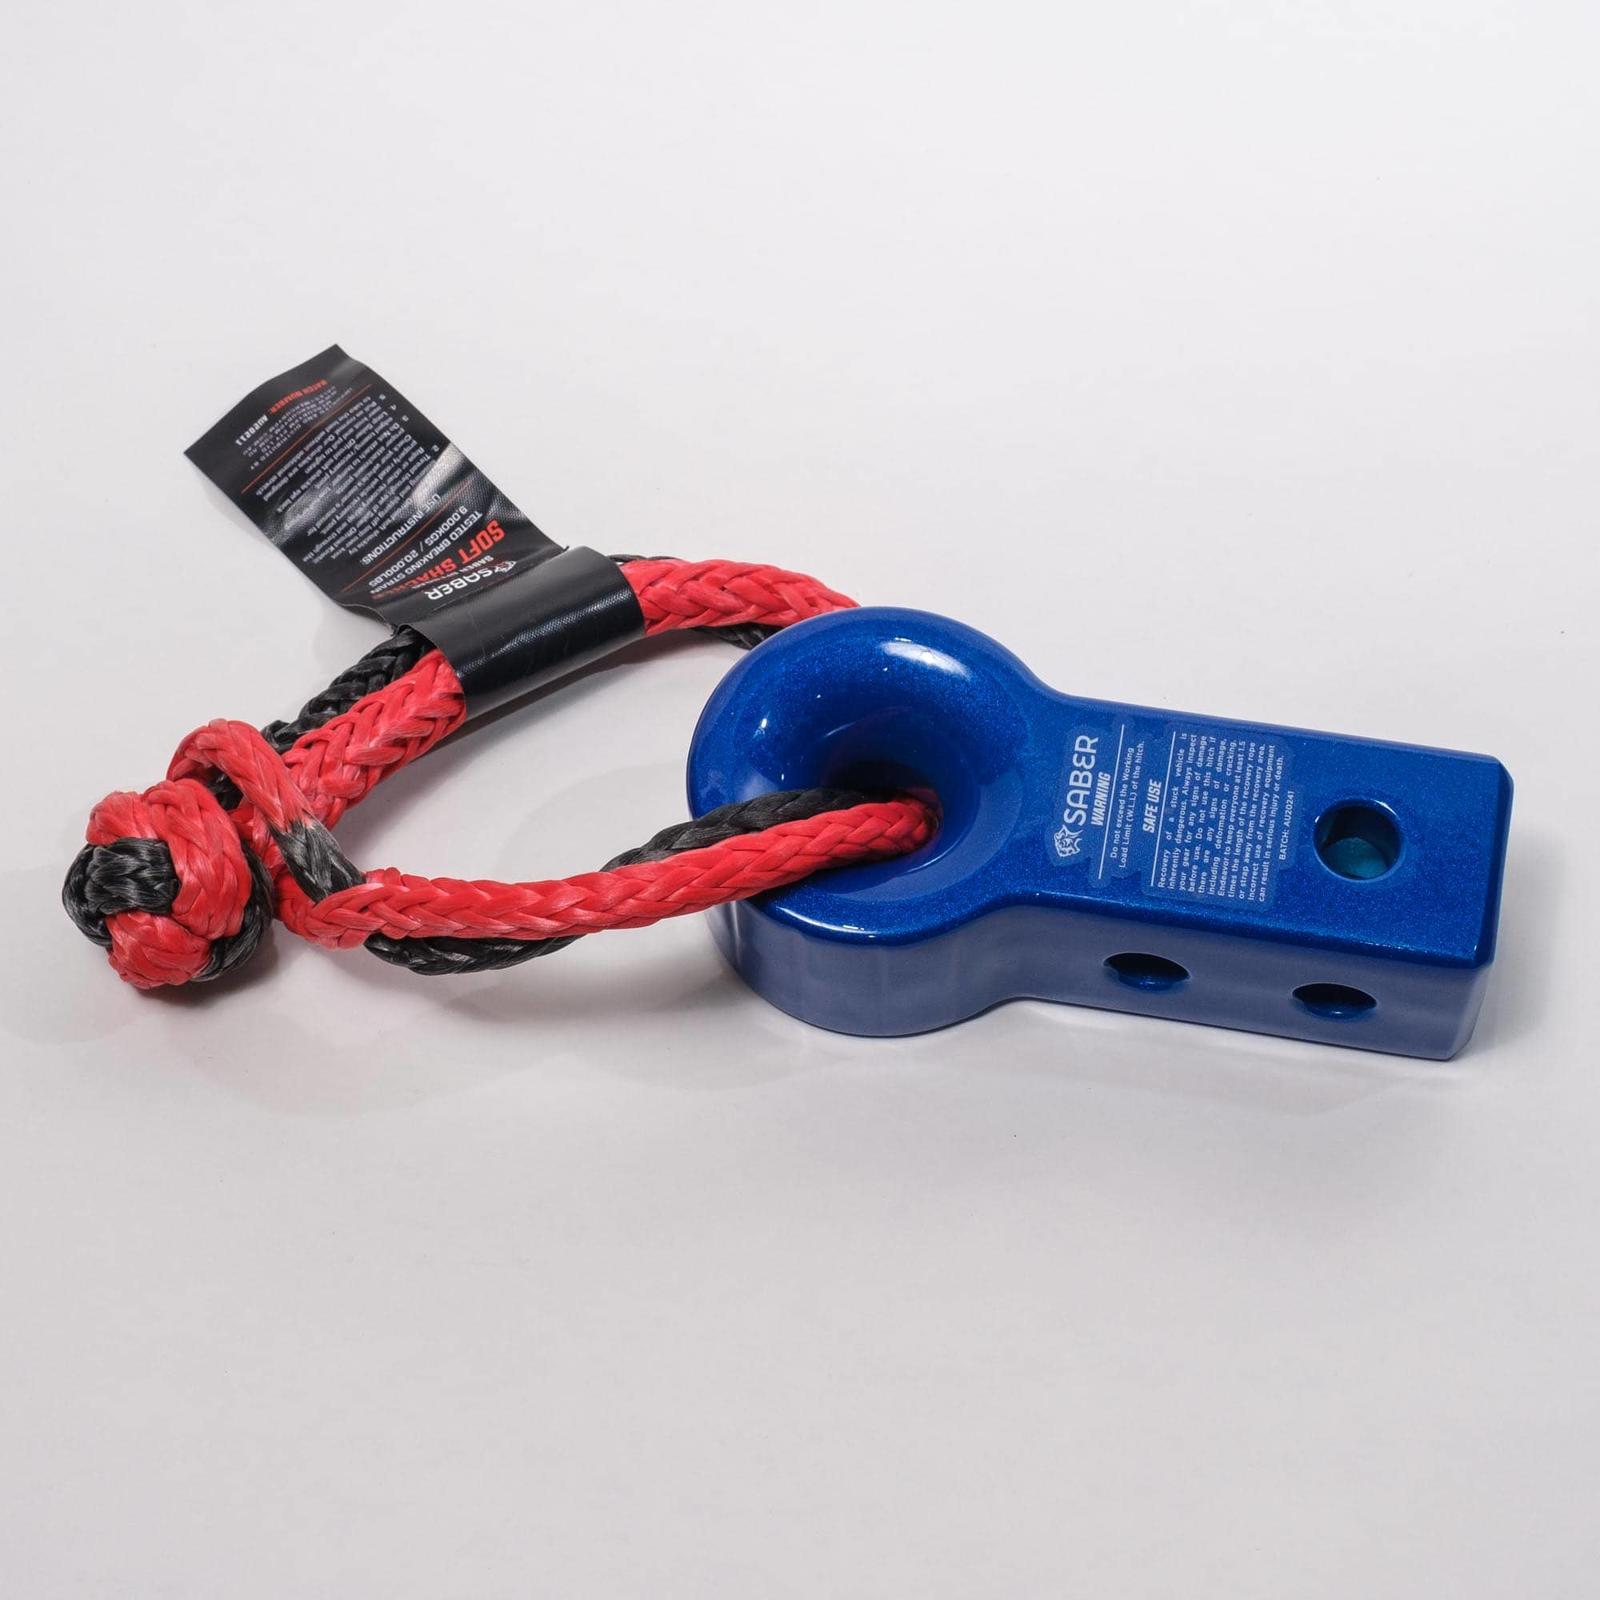 7075 Saber Alloy Recovery Hitch - Blue Prismatic & 9K Soft Shackle